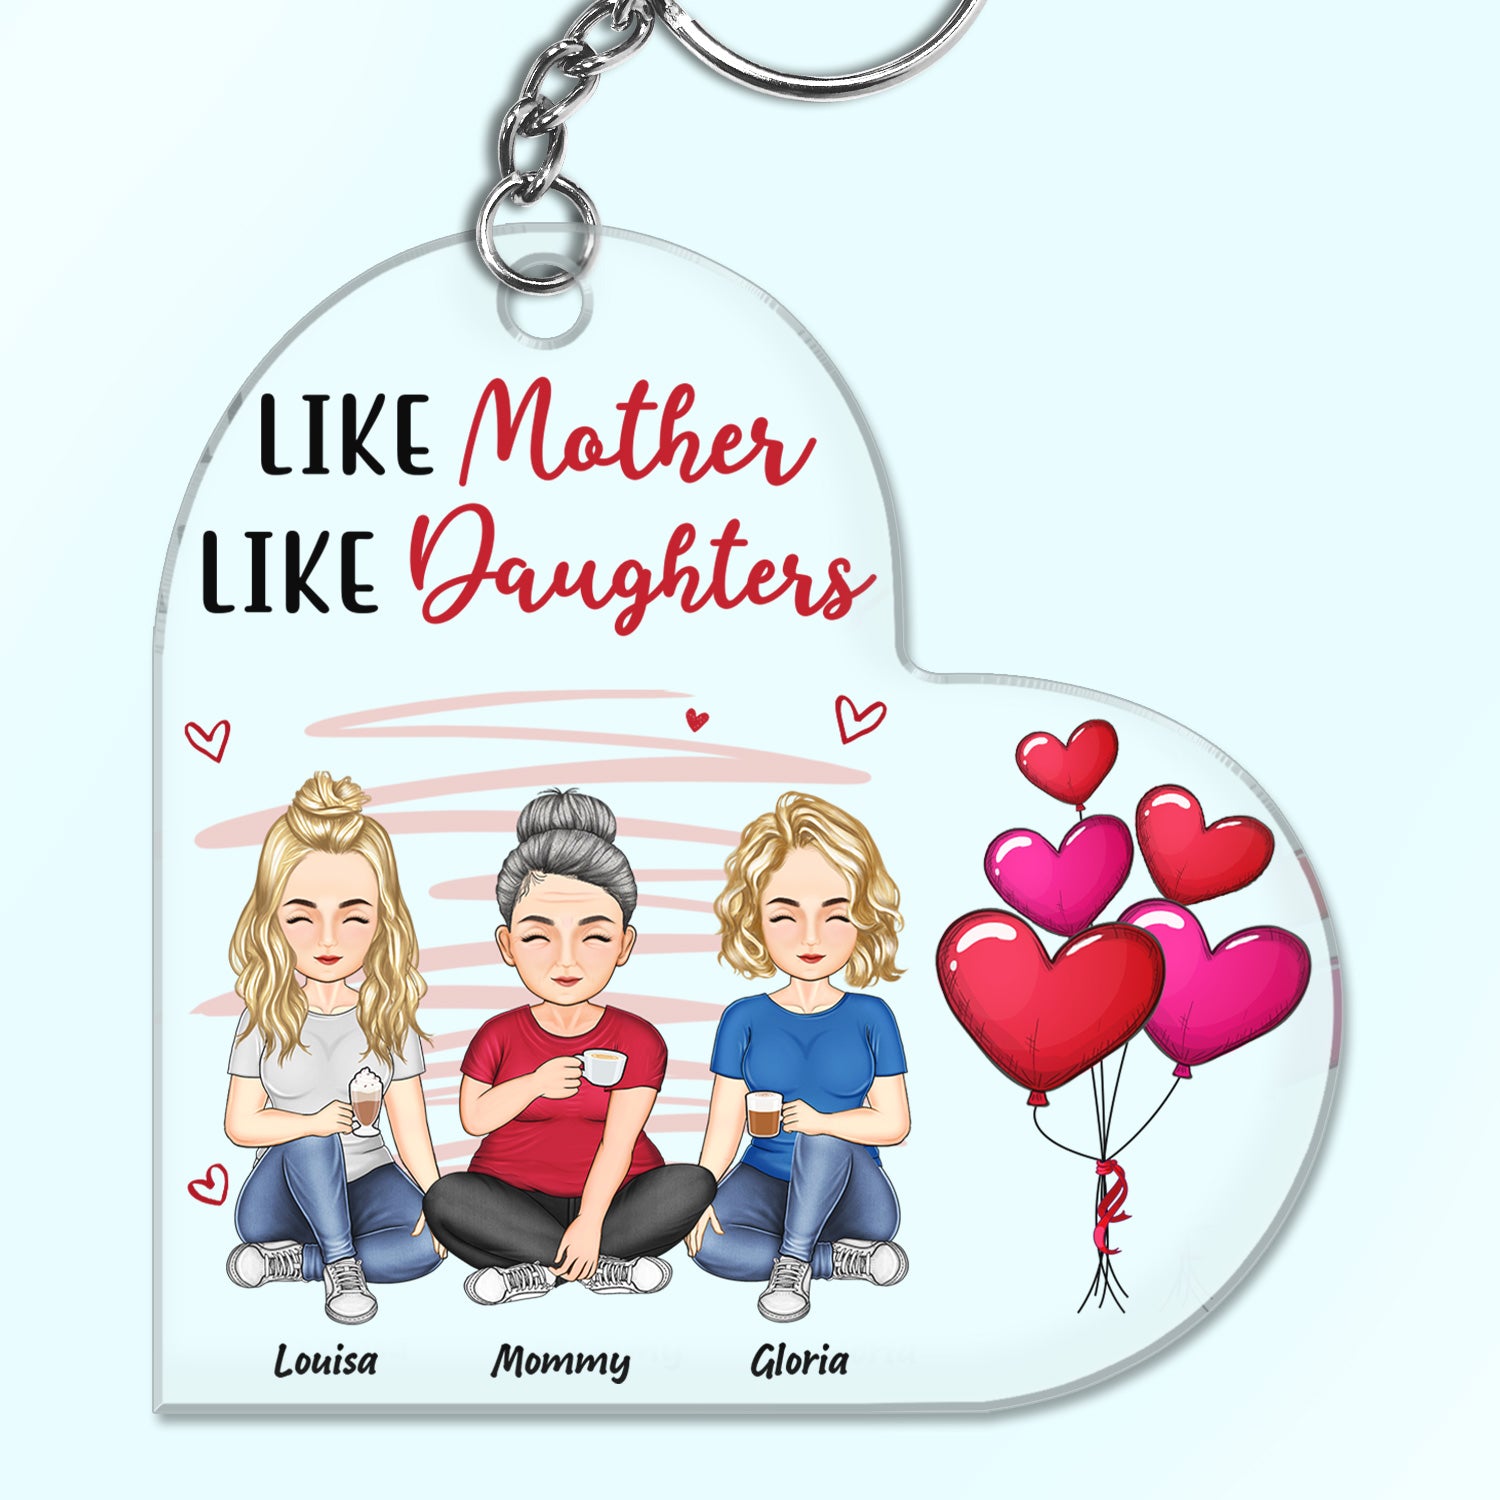 Like Mother Like Daughters - Birthday, Loving Gift For Mommy, Mother, Grandma, Grandmother - Personalized Custom Acrylic Keychain